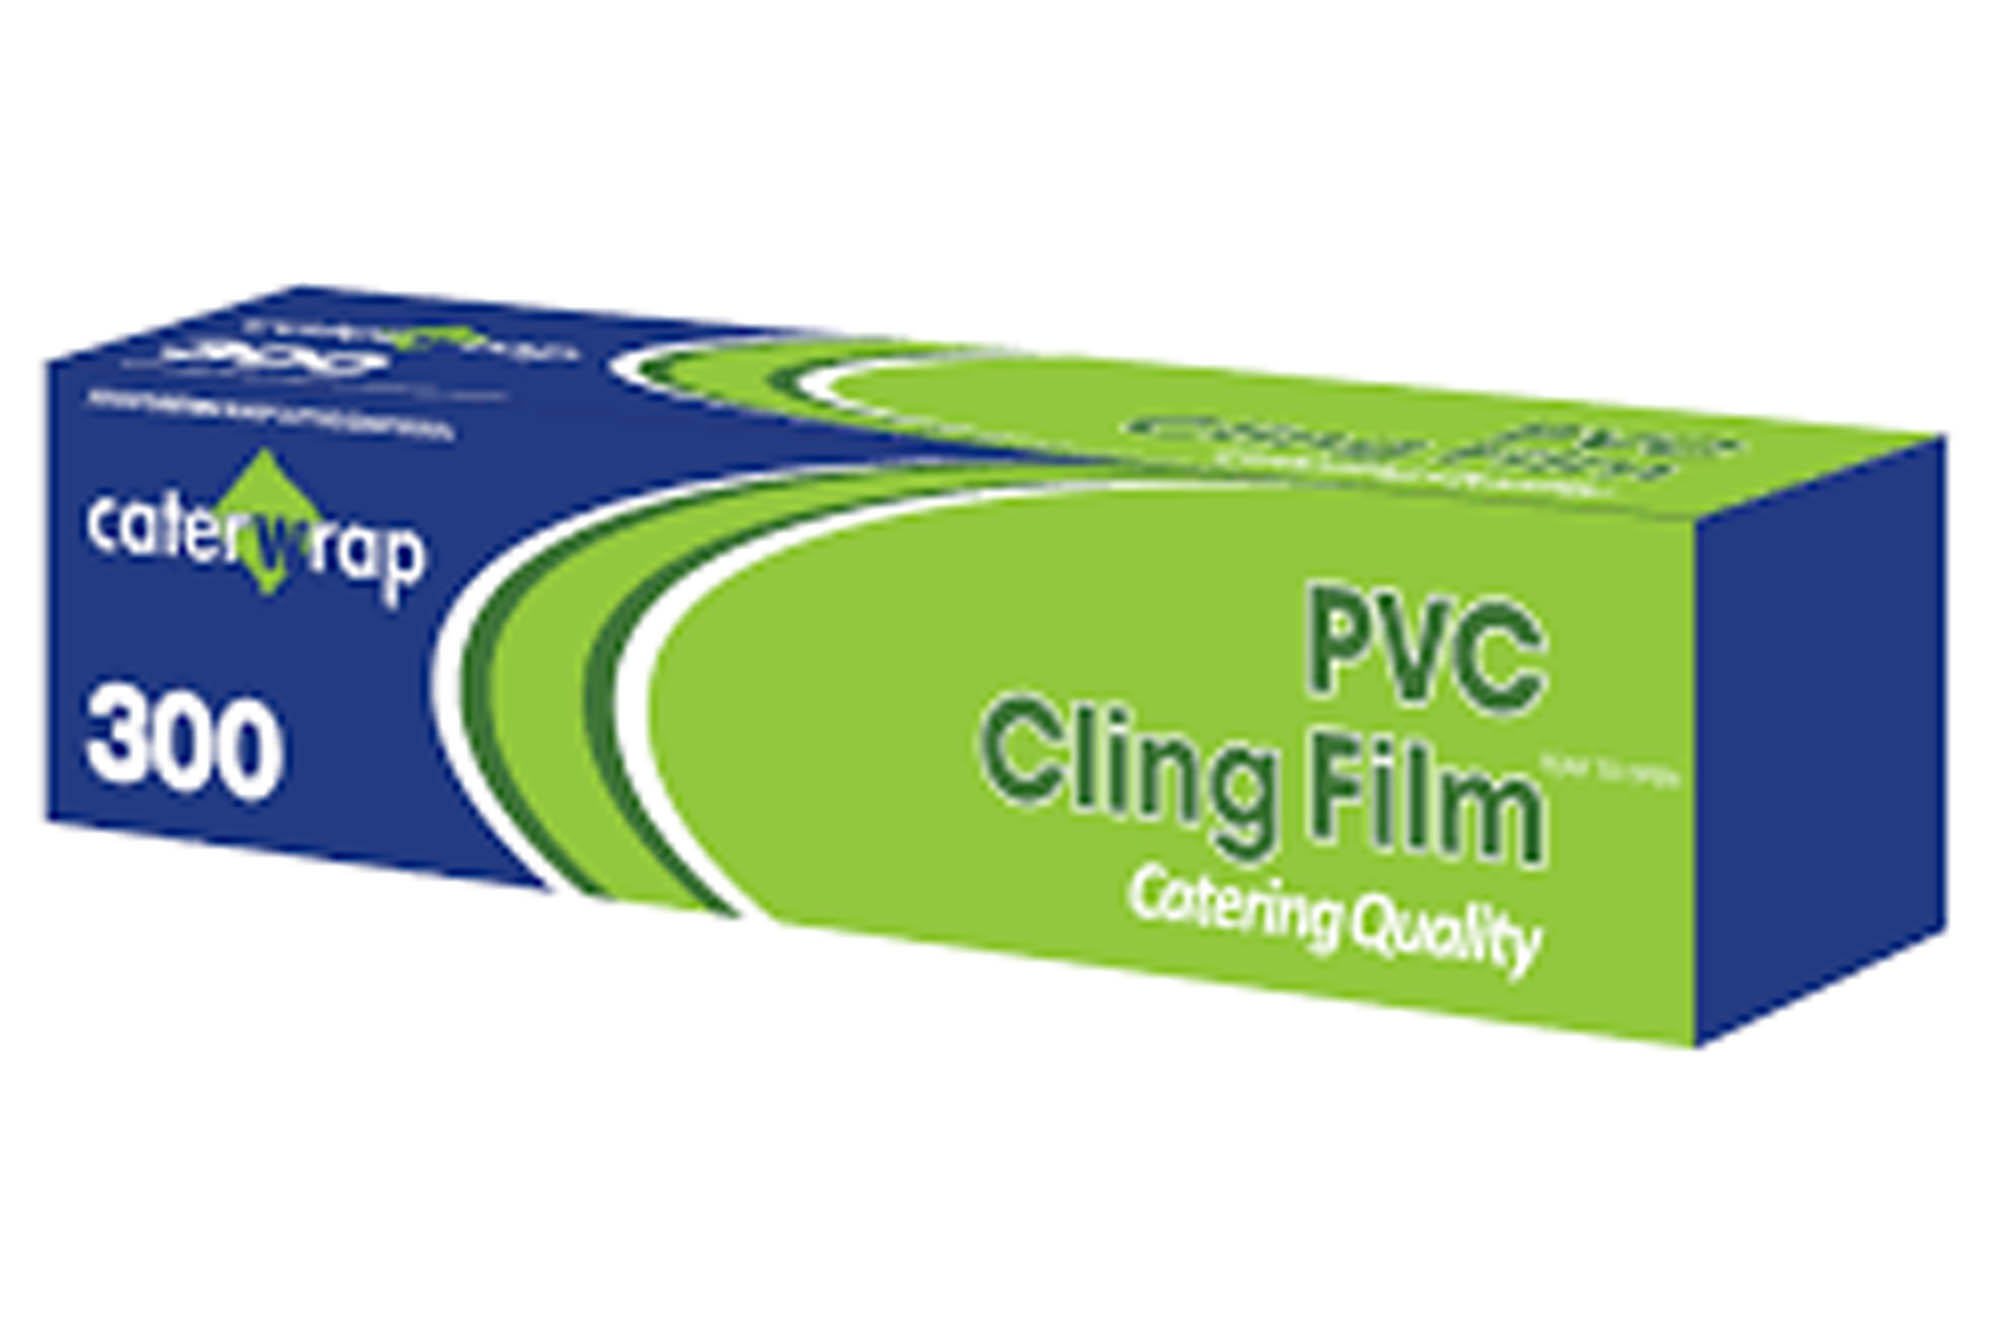 Catering cling film